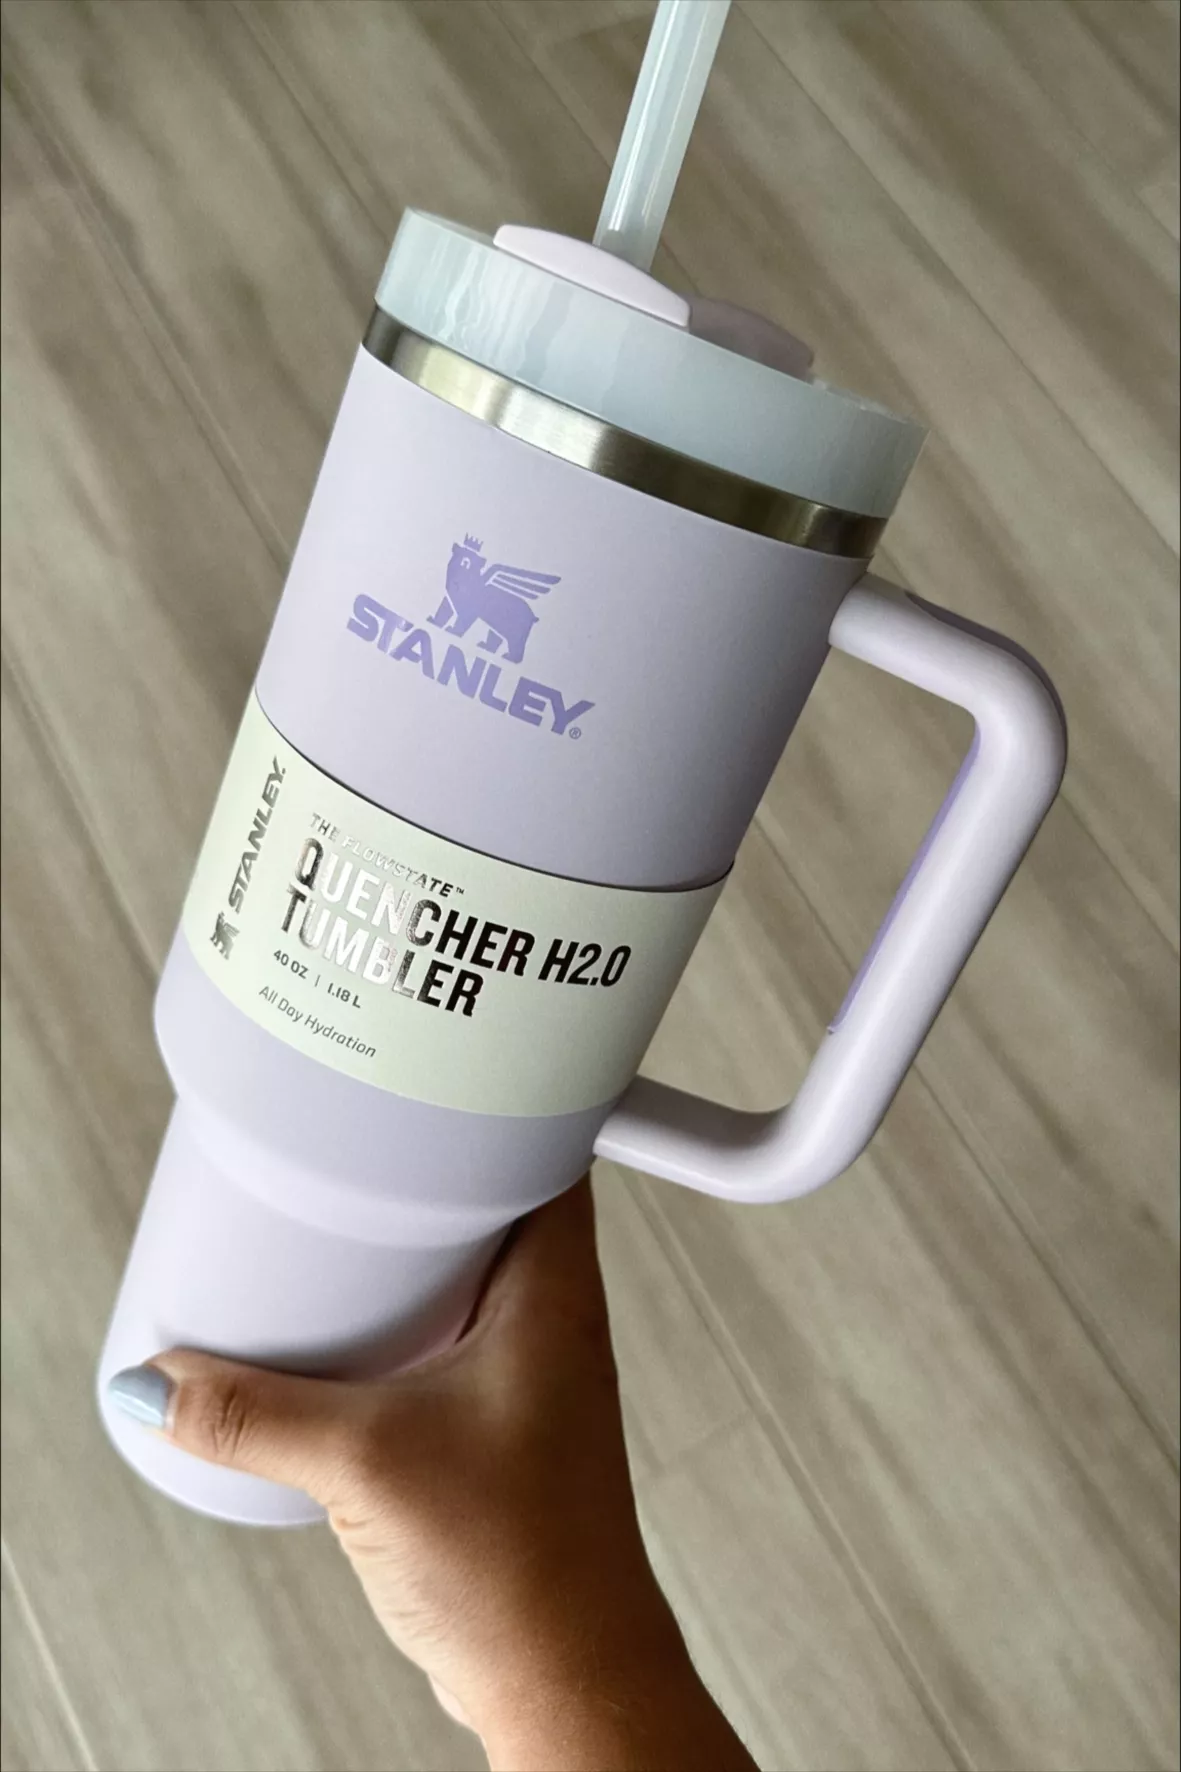 Stanley The Quencher H2.0 FlowState Tumbler (Soft Matte)